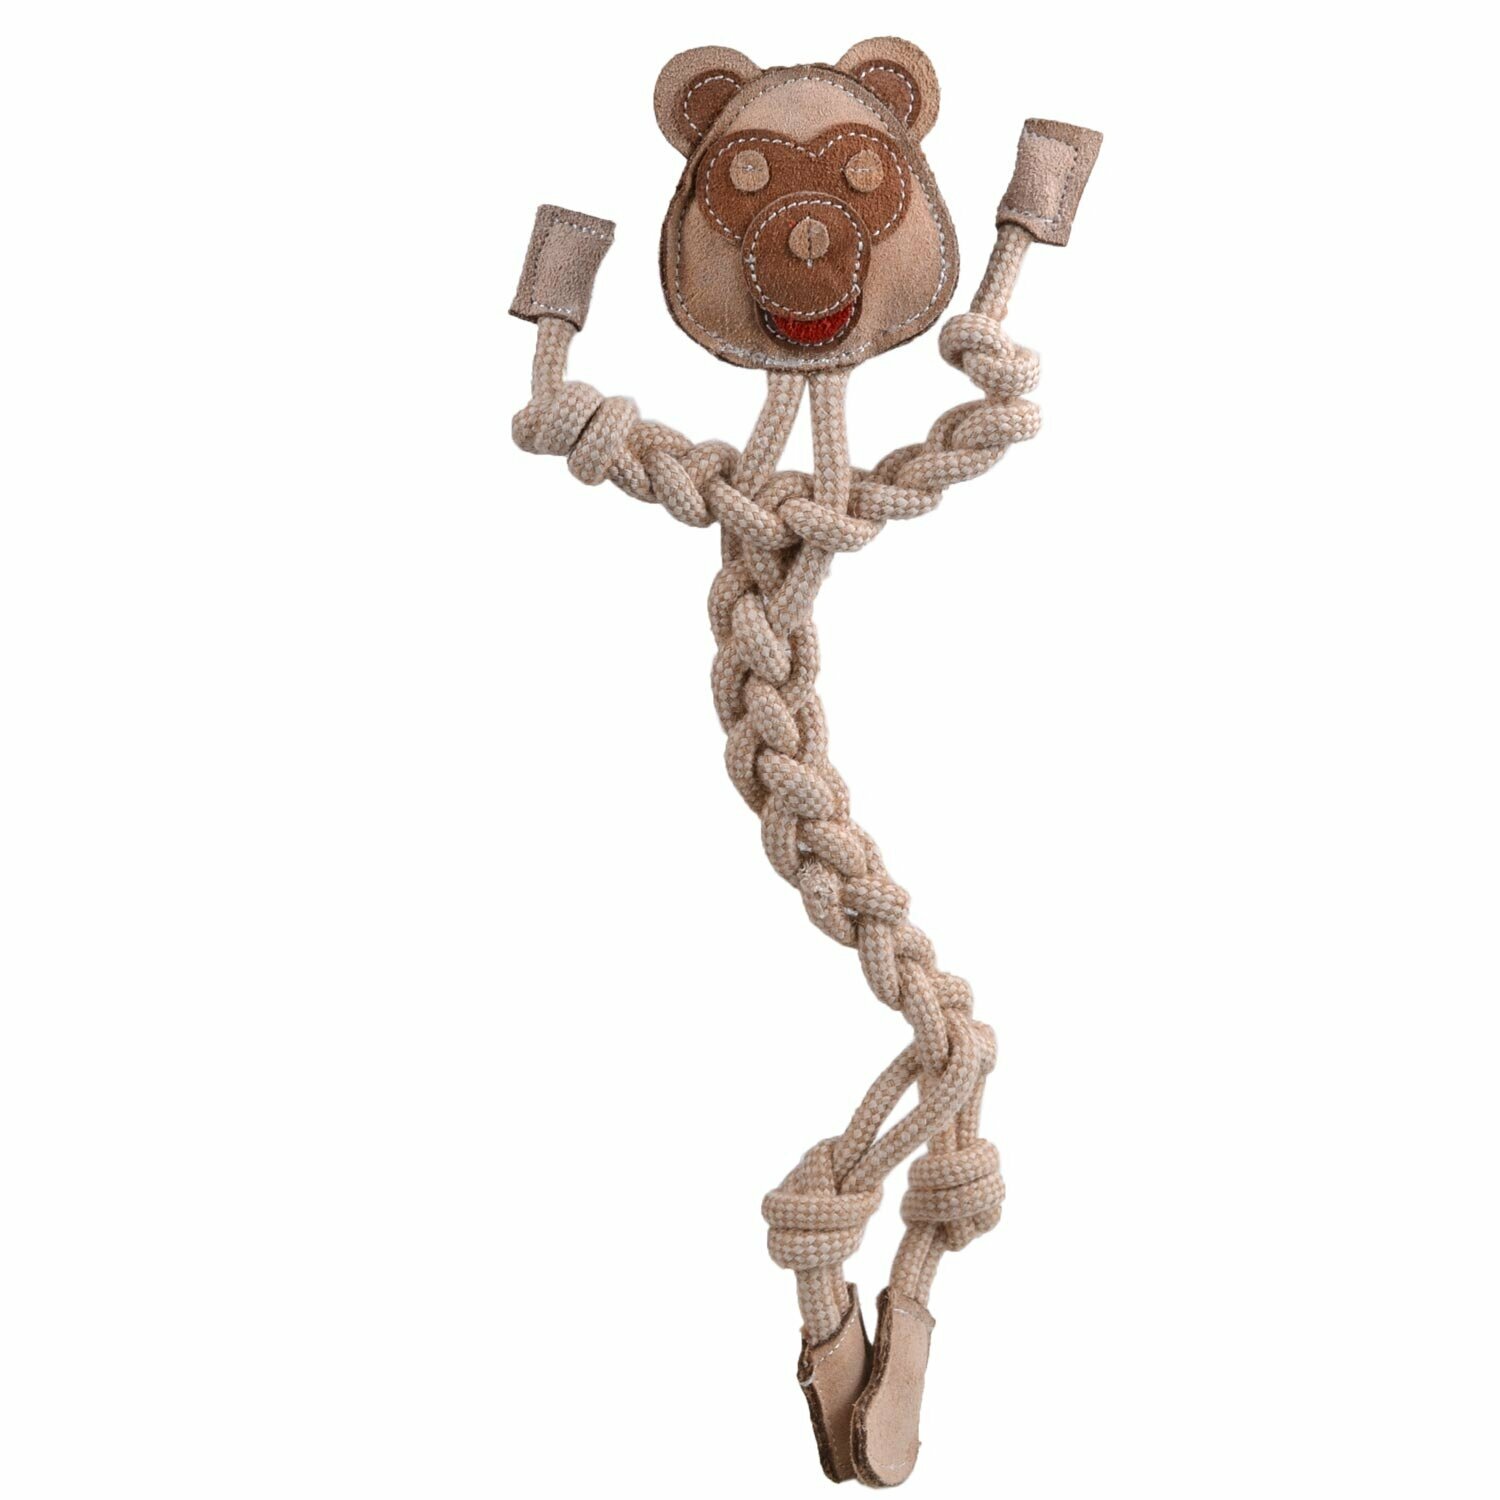 Cool monkey, dog toy made of natural raw materials